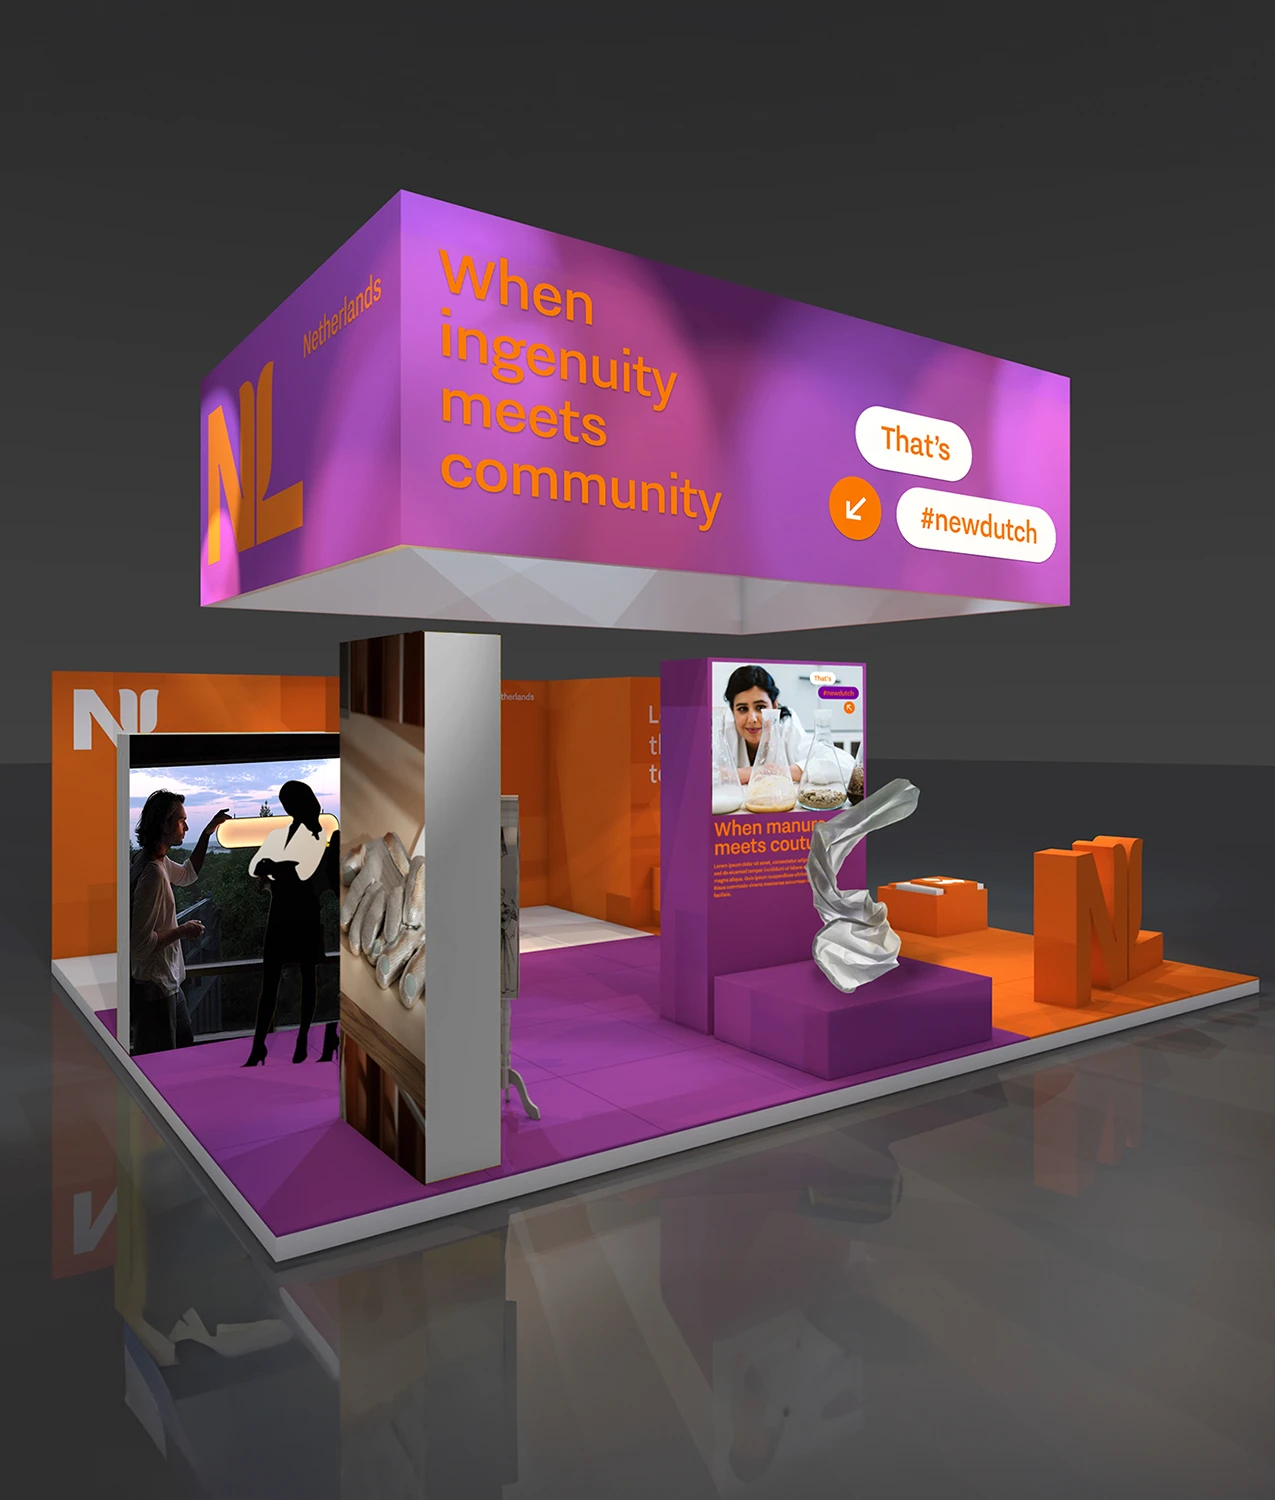 New-Dutch-images_1275-x-1500_Event-booth